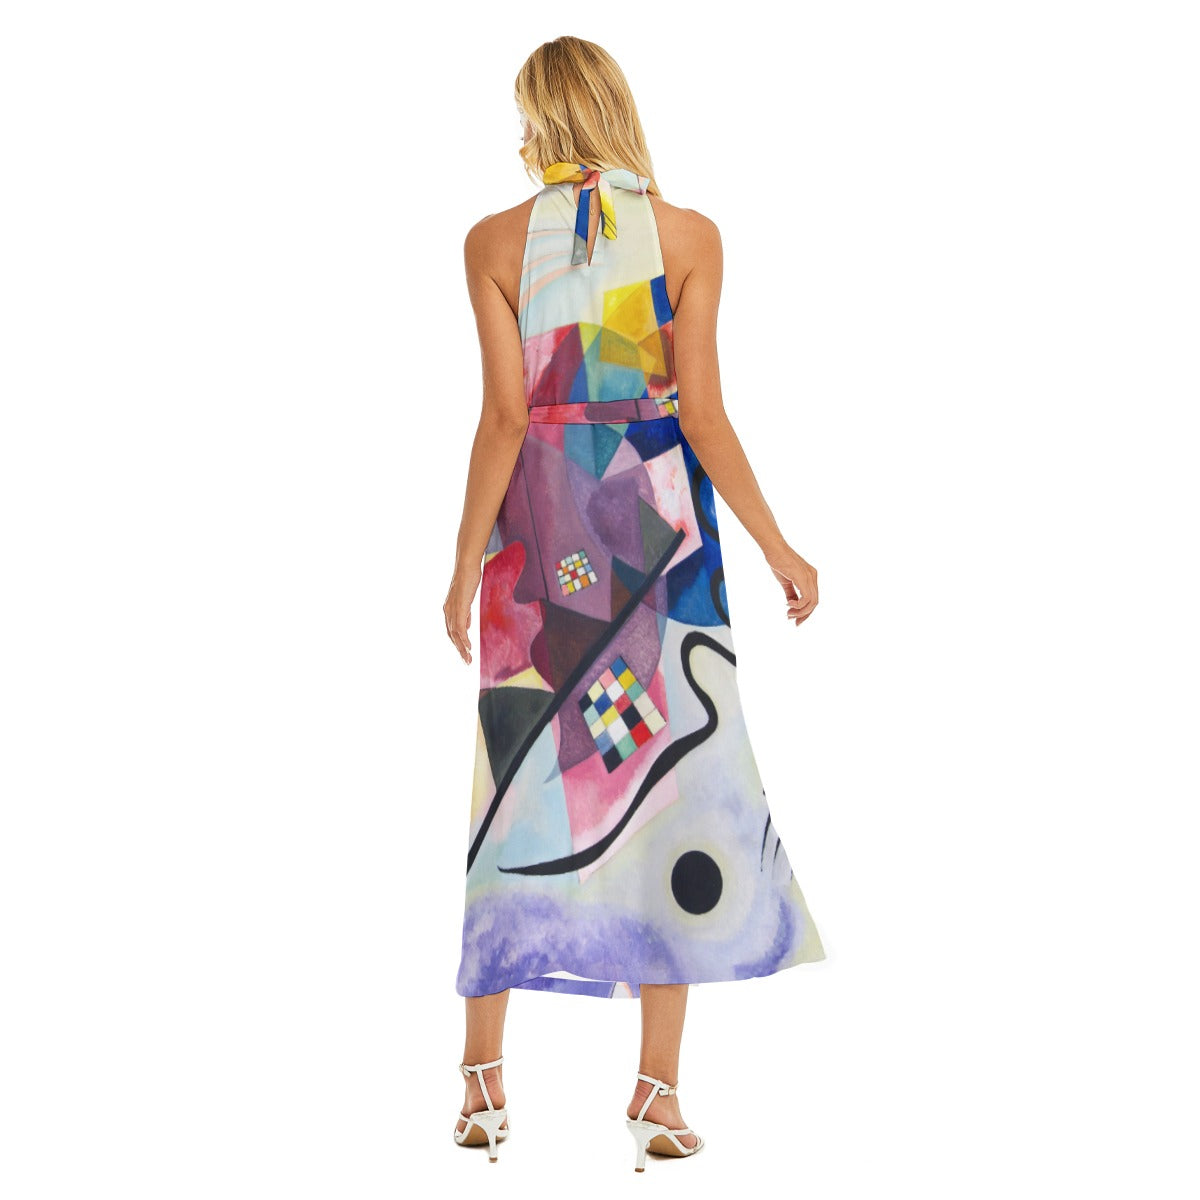 Abstract Art Fashion in Yellow-Red-Blue